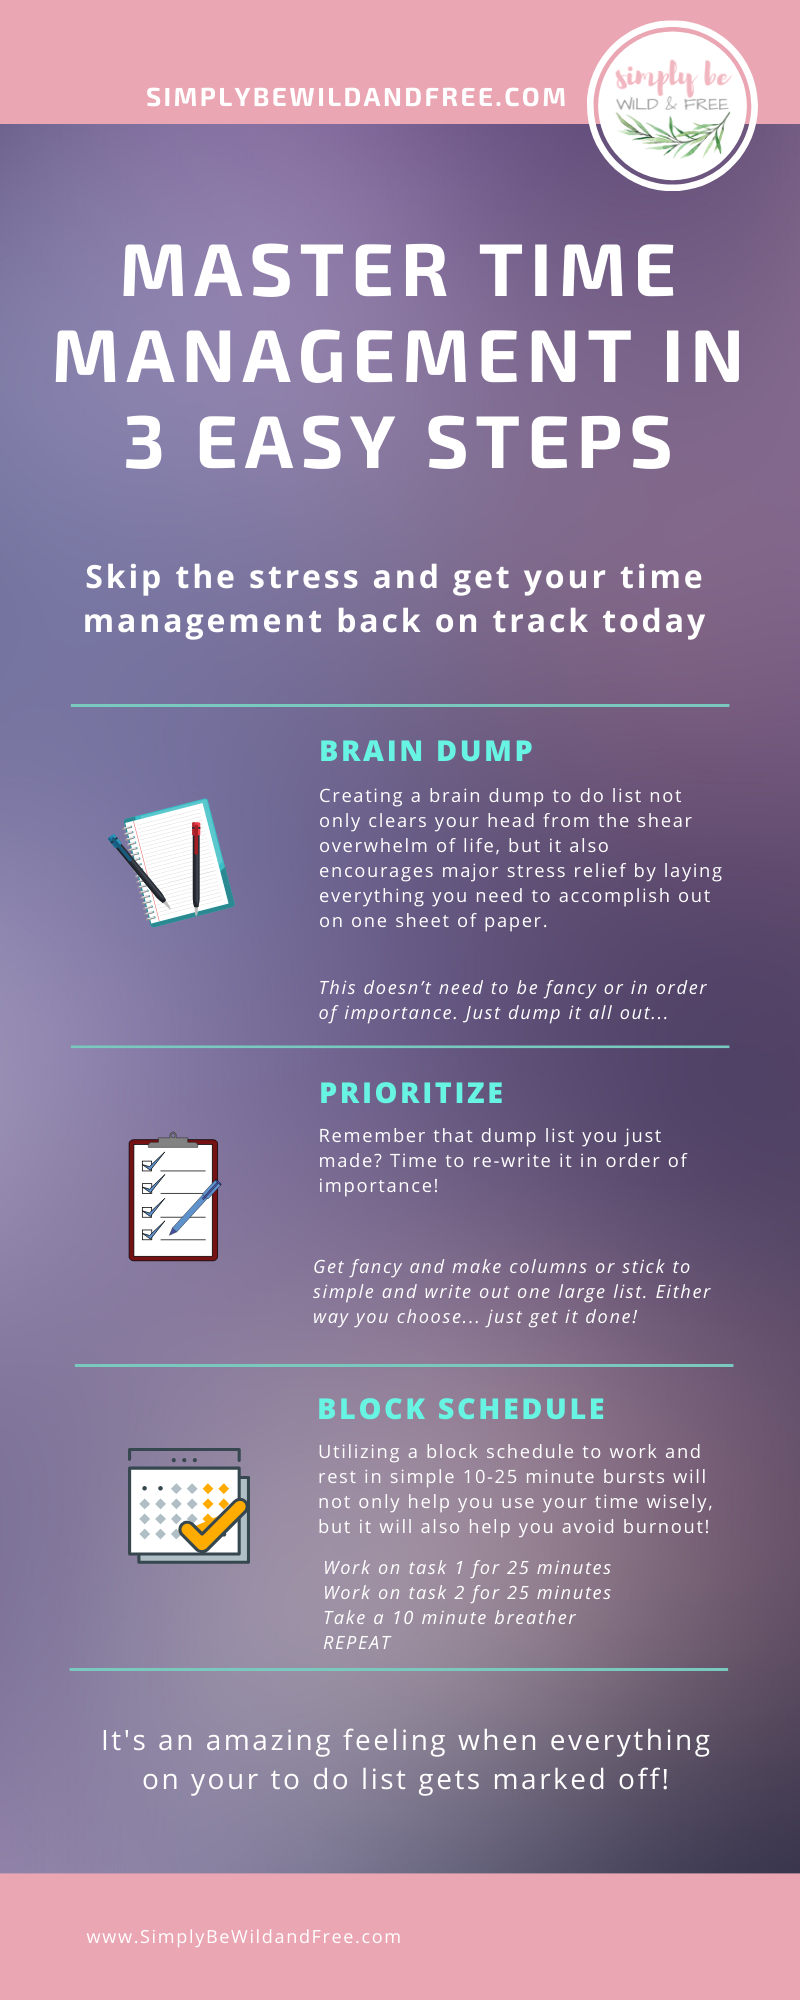 Mastering Time Management in 3 Easy Steps